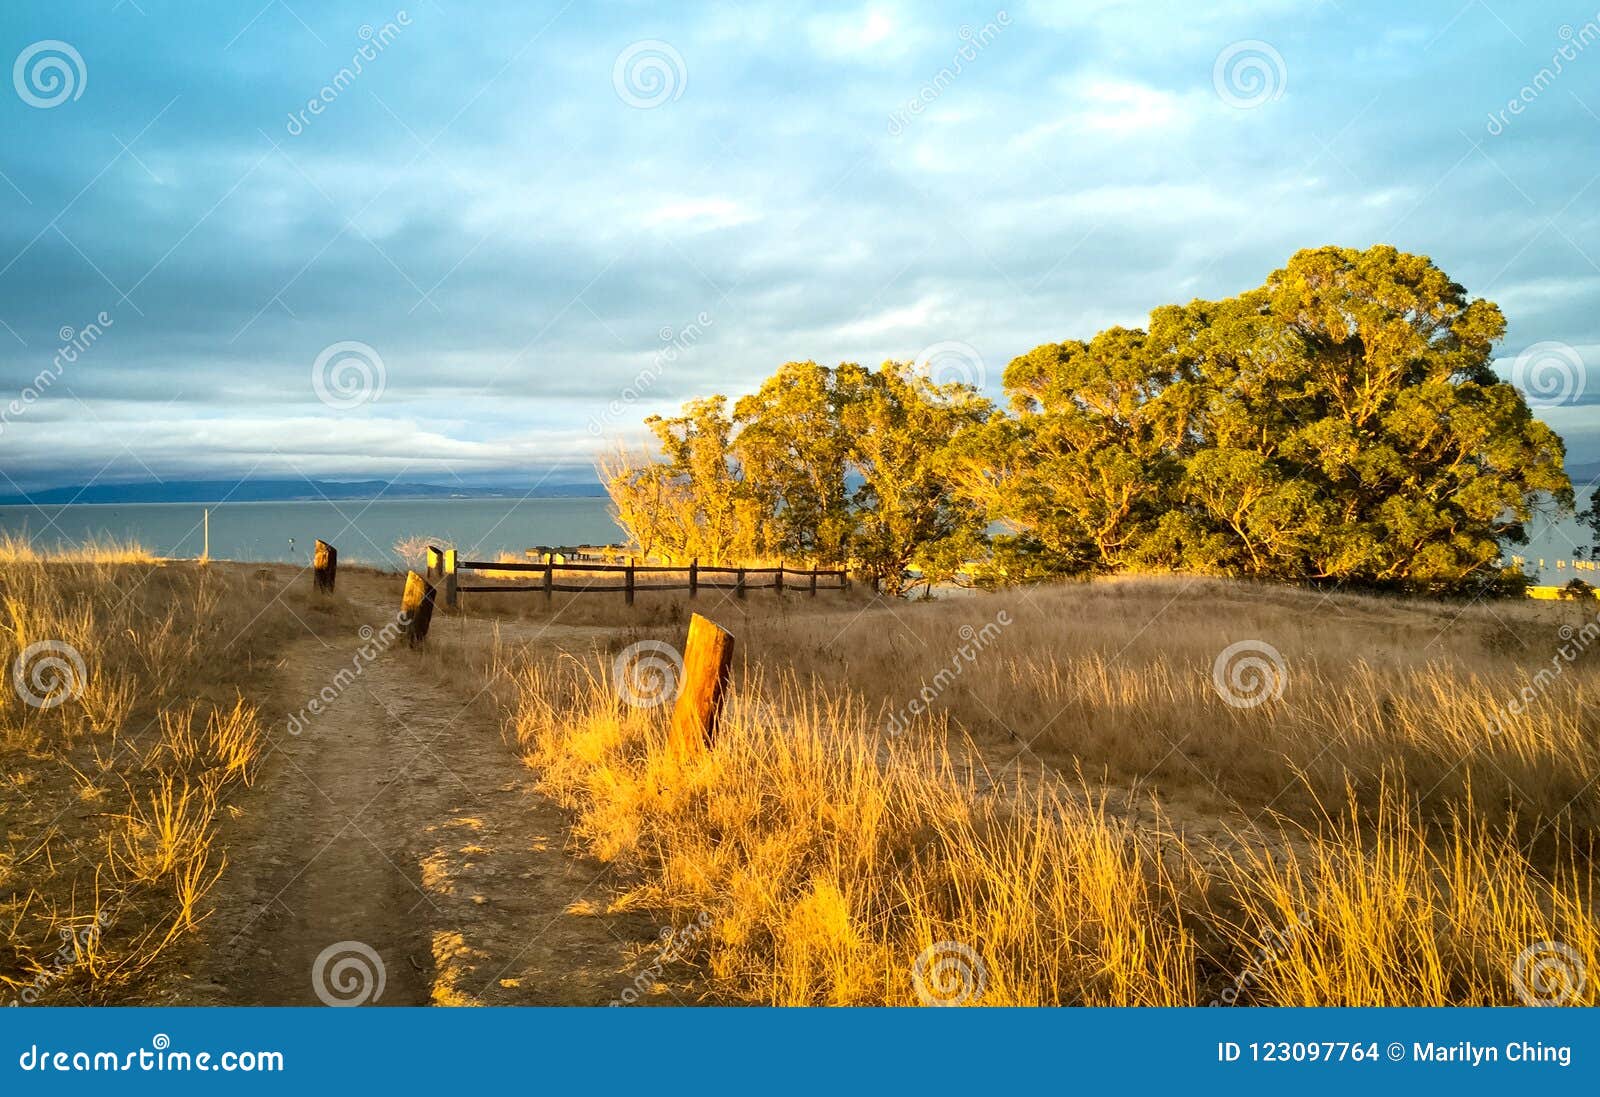 Sunlit Fall Season Nature Background with Walking Path, Golden G Stock